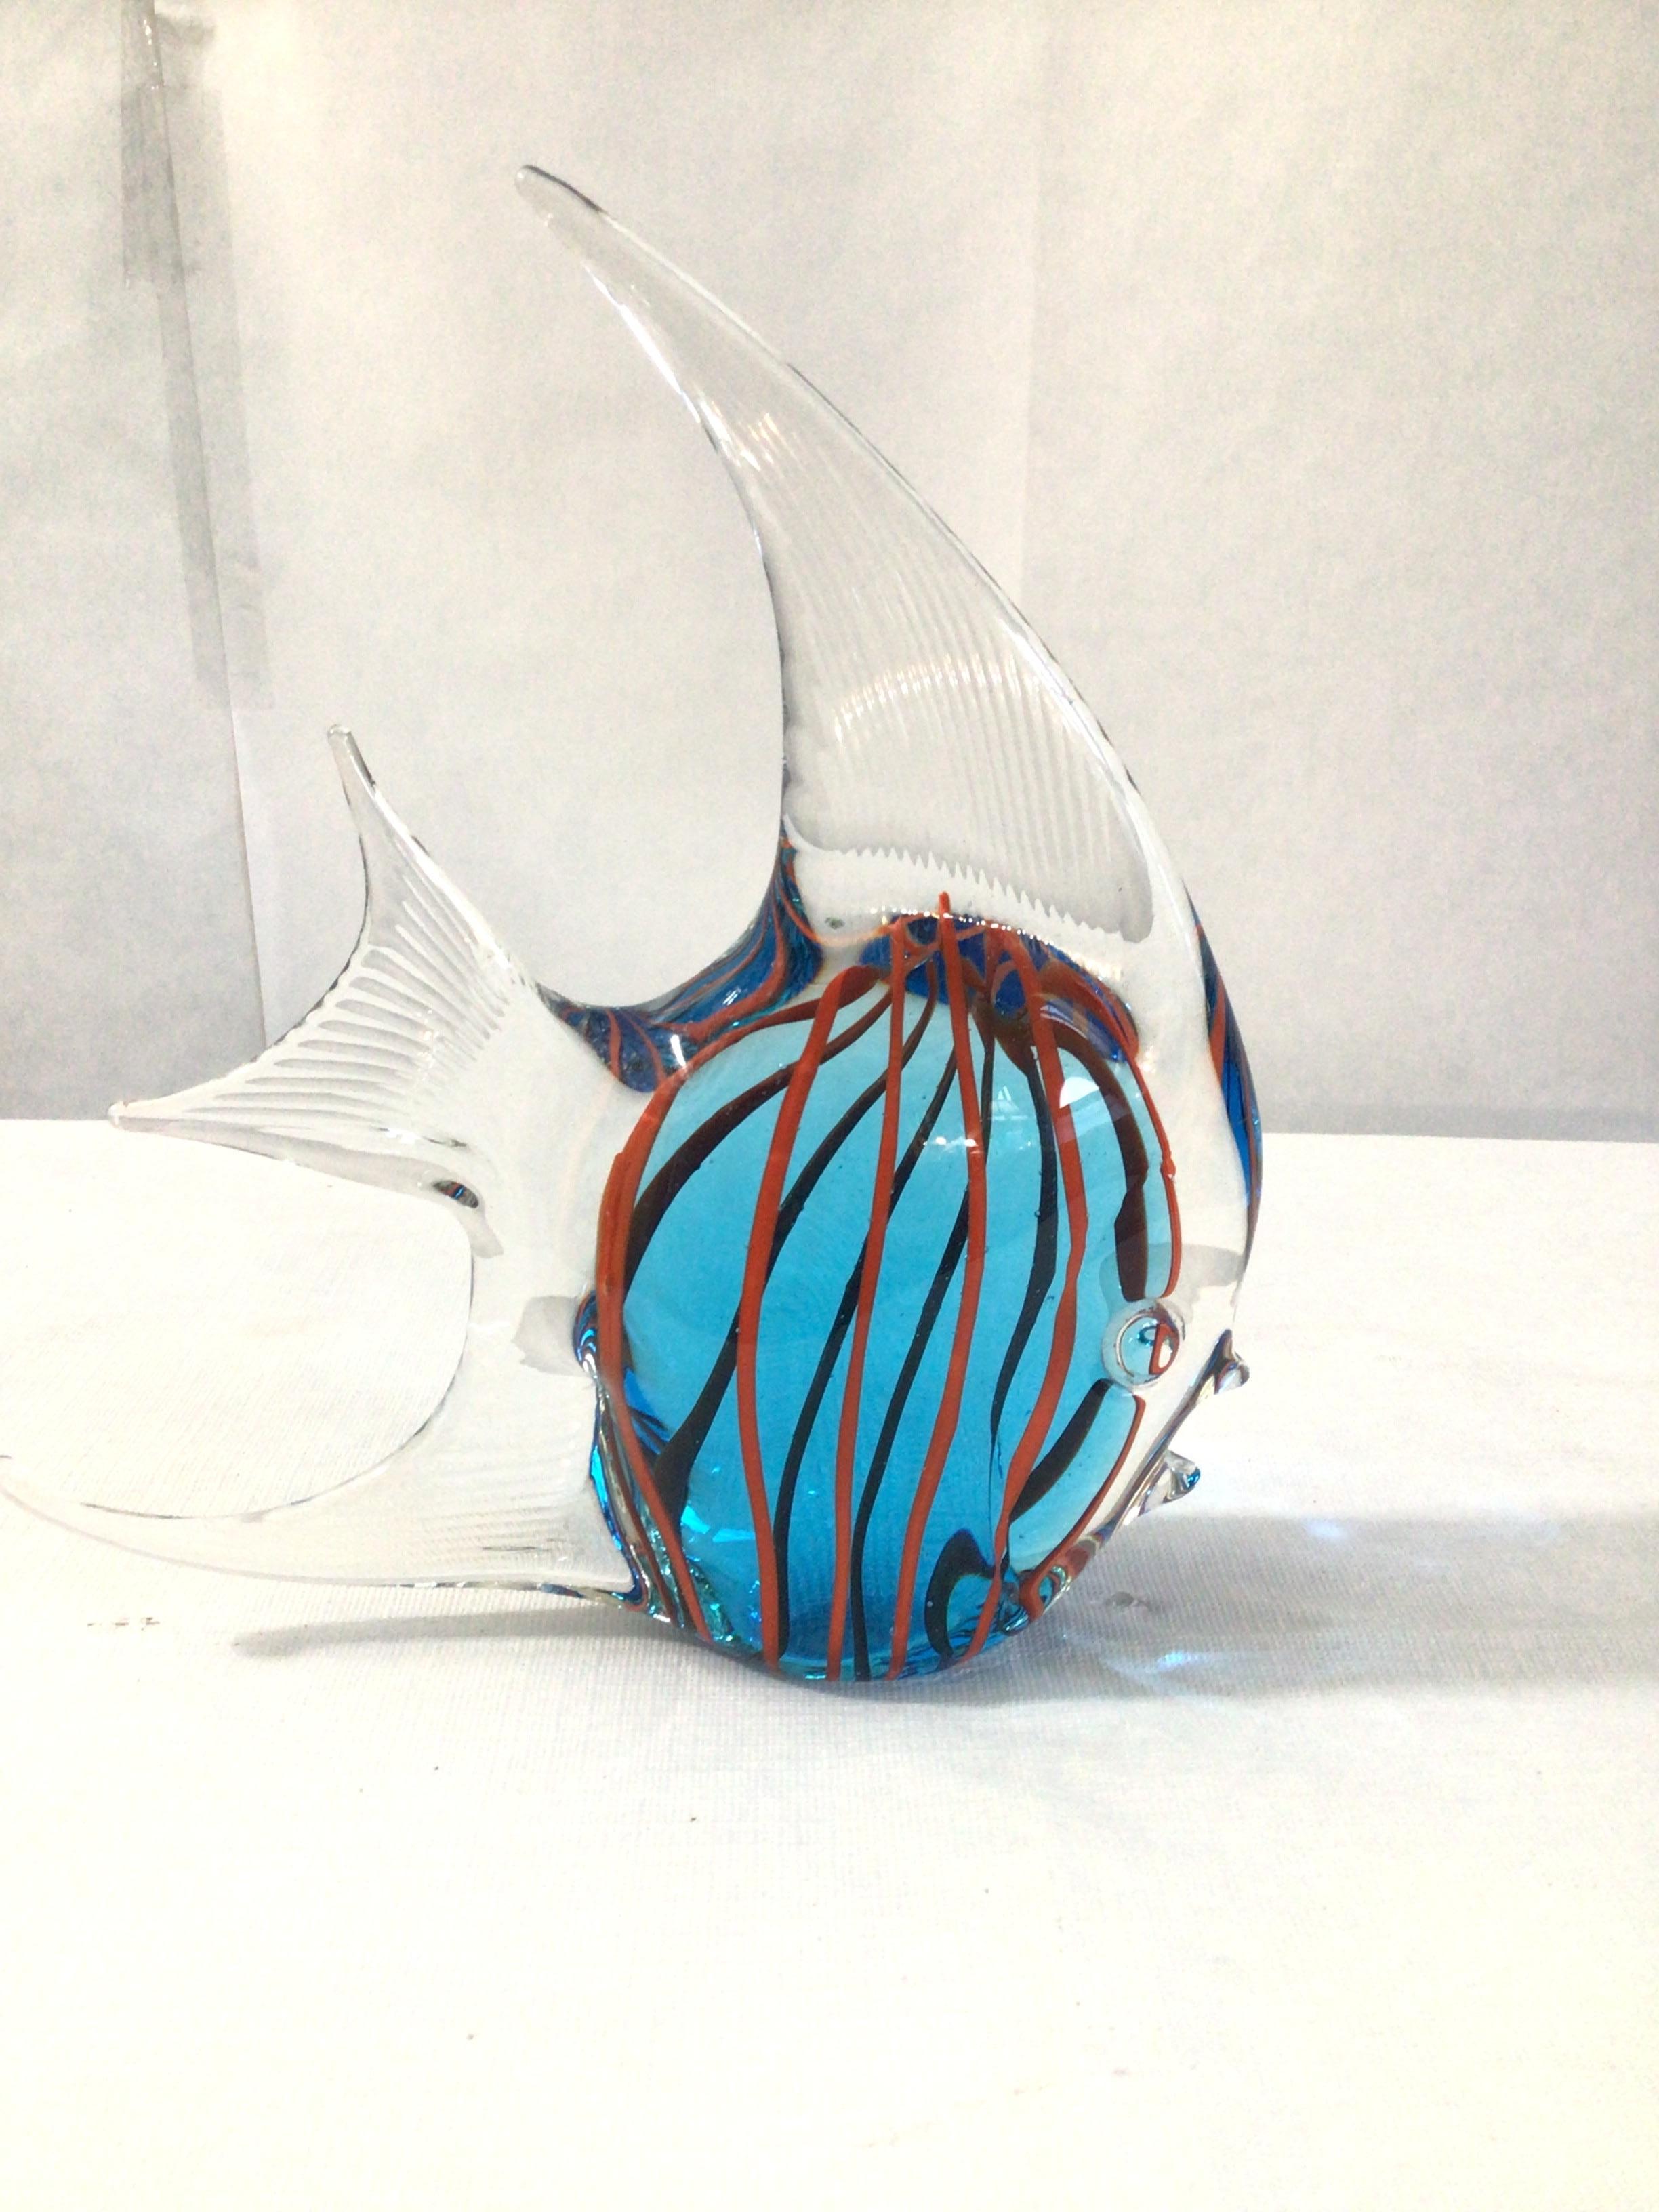 1960s Murano Style Colorful Art Glass Angel Fish Sculpture
Unique work of art made by hand
Colors: blue, red, and clear glass.